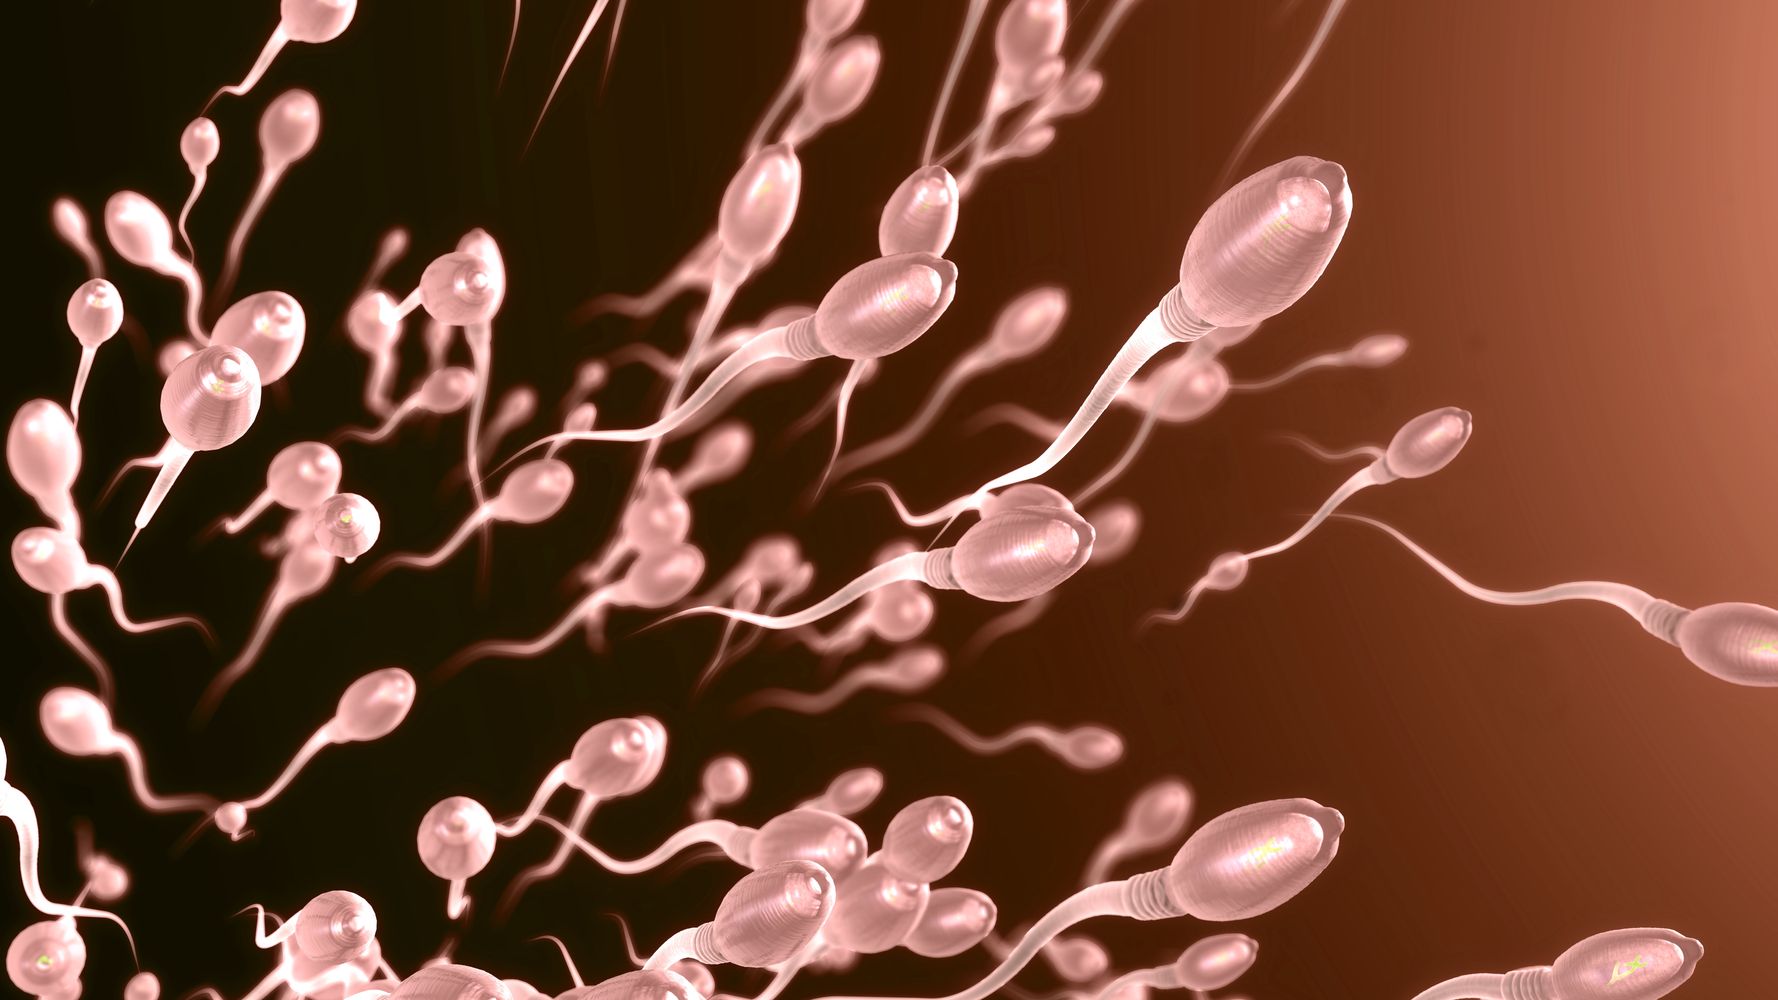 A Shortage Of Sperm Donors The Brexit Dilemma We Didn T See Coming